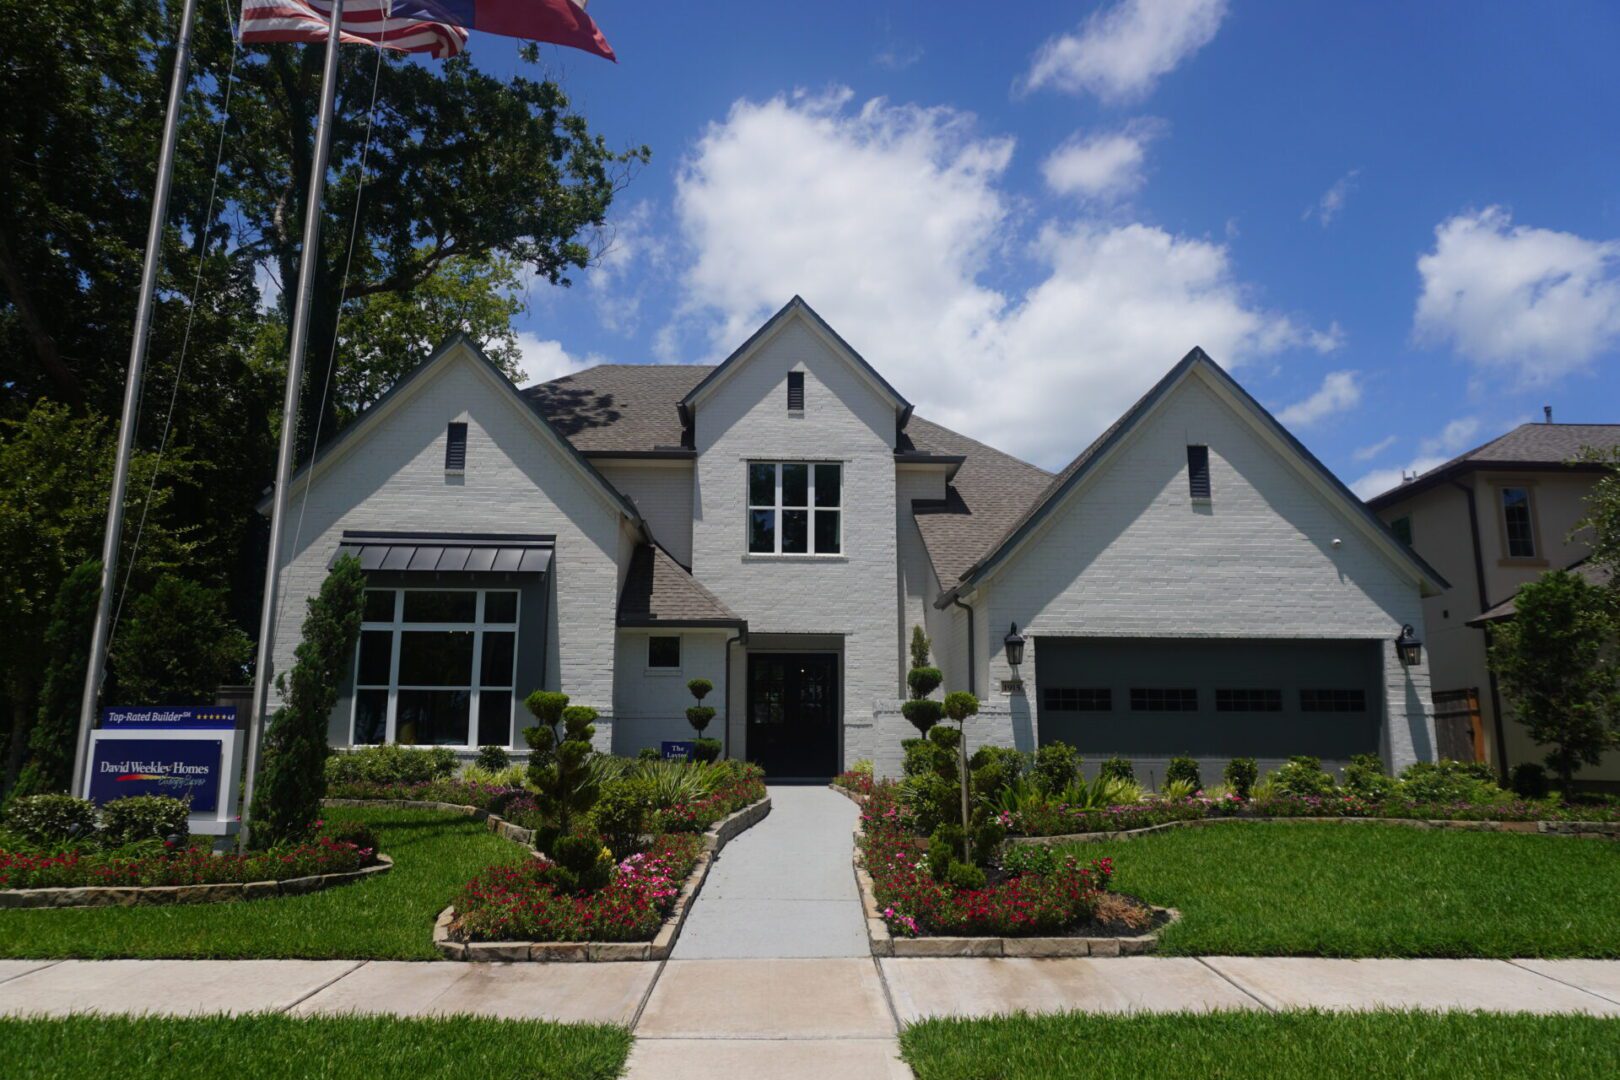 A Texas home with a flag in front of it, built by skilled builders.